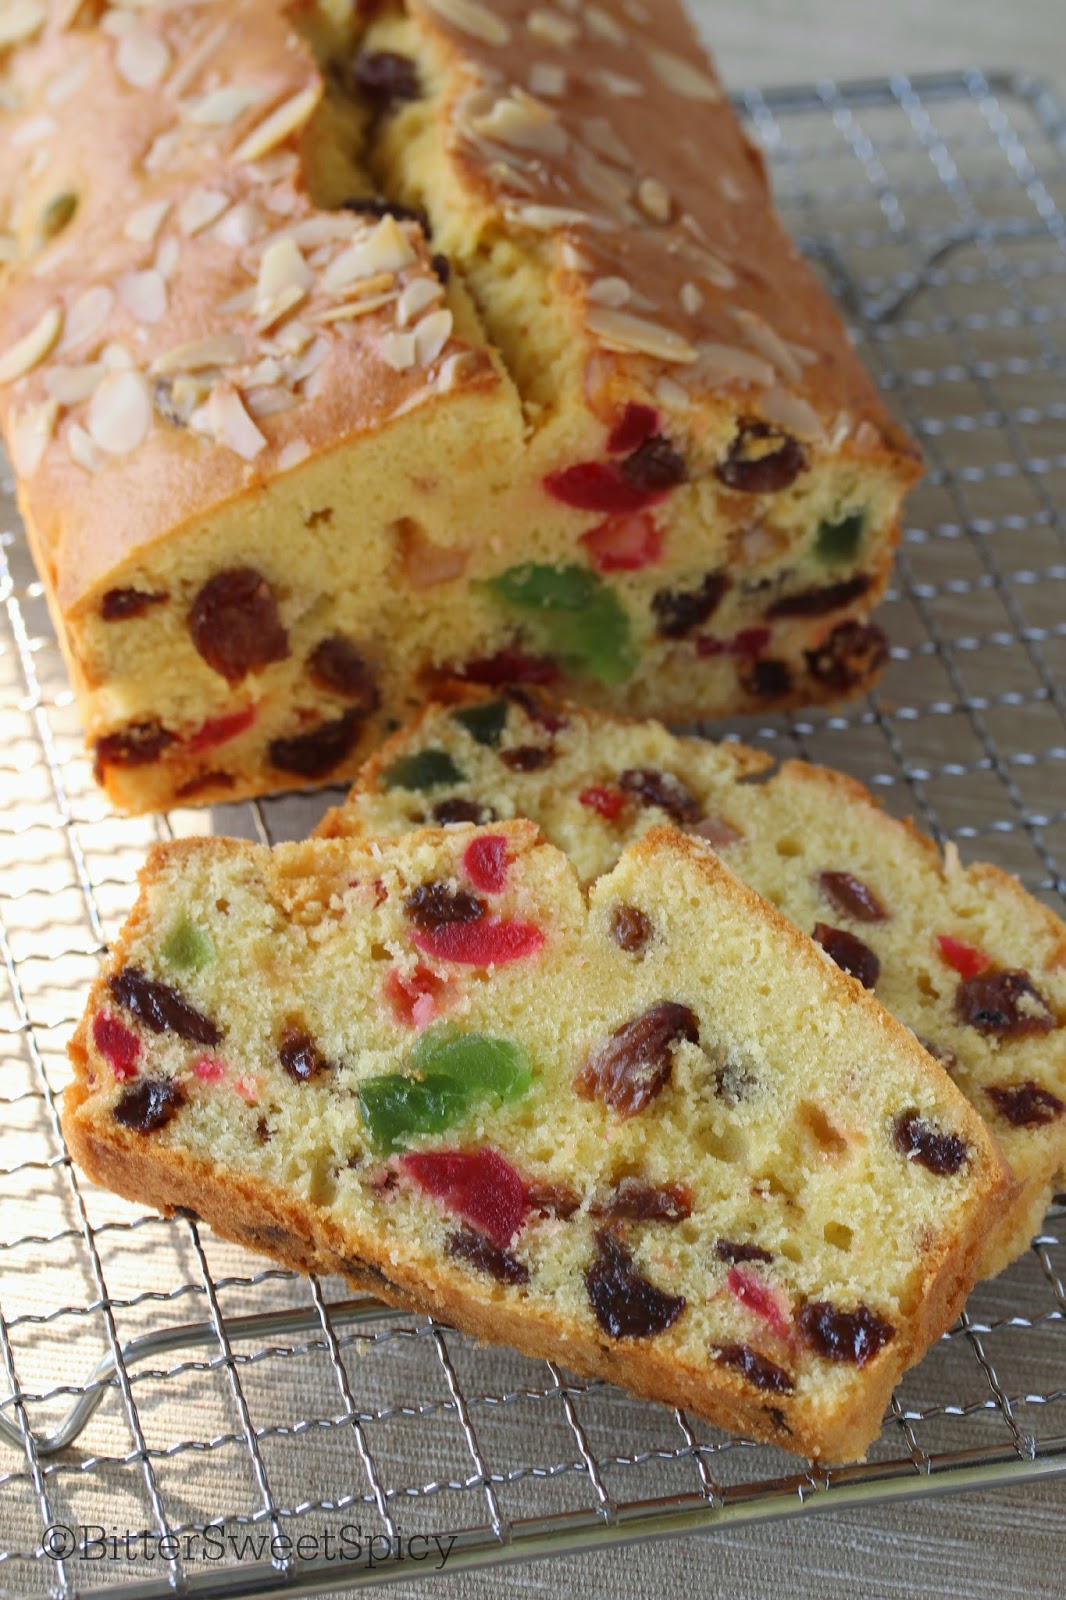 BitterSweetSpicy: Light Fruit Cake